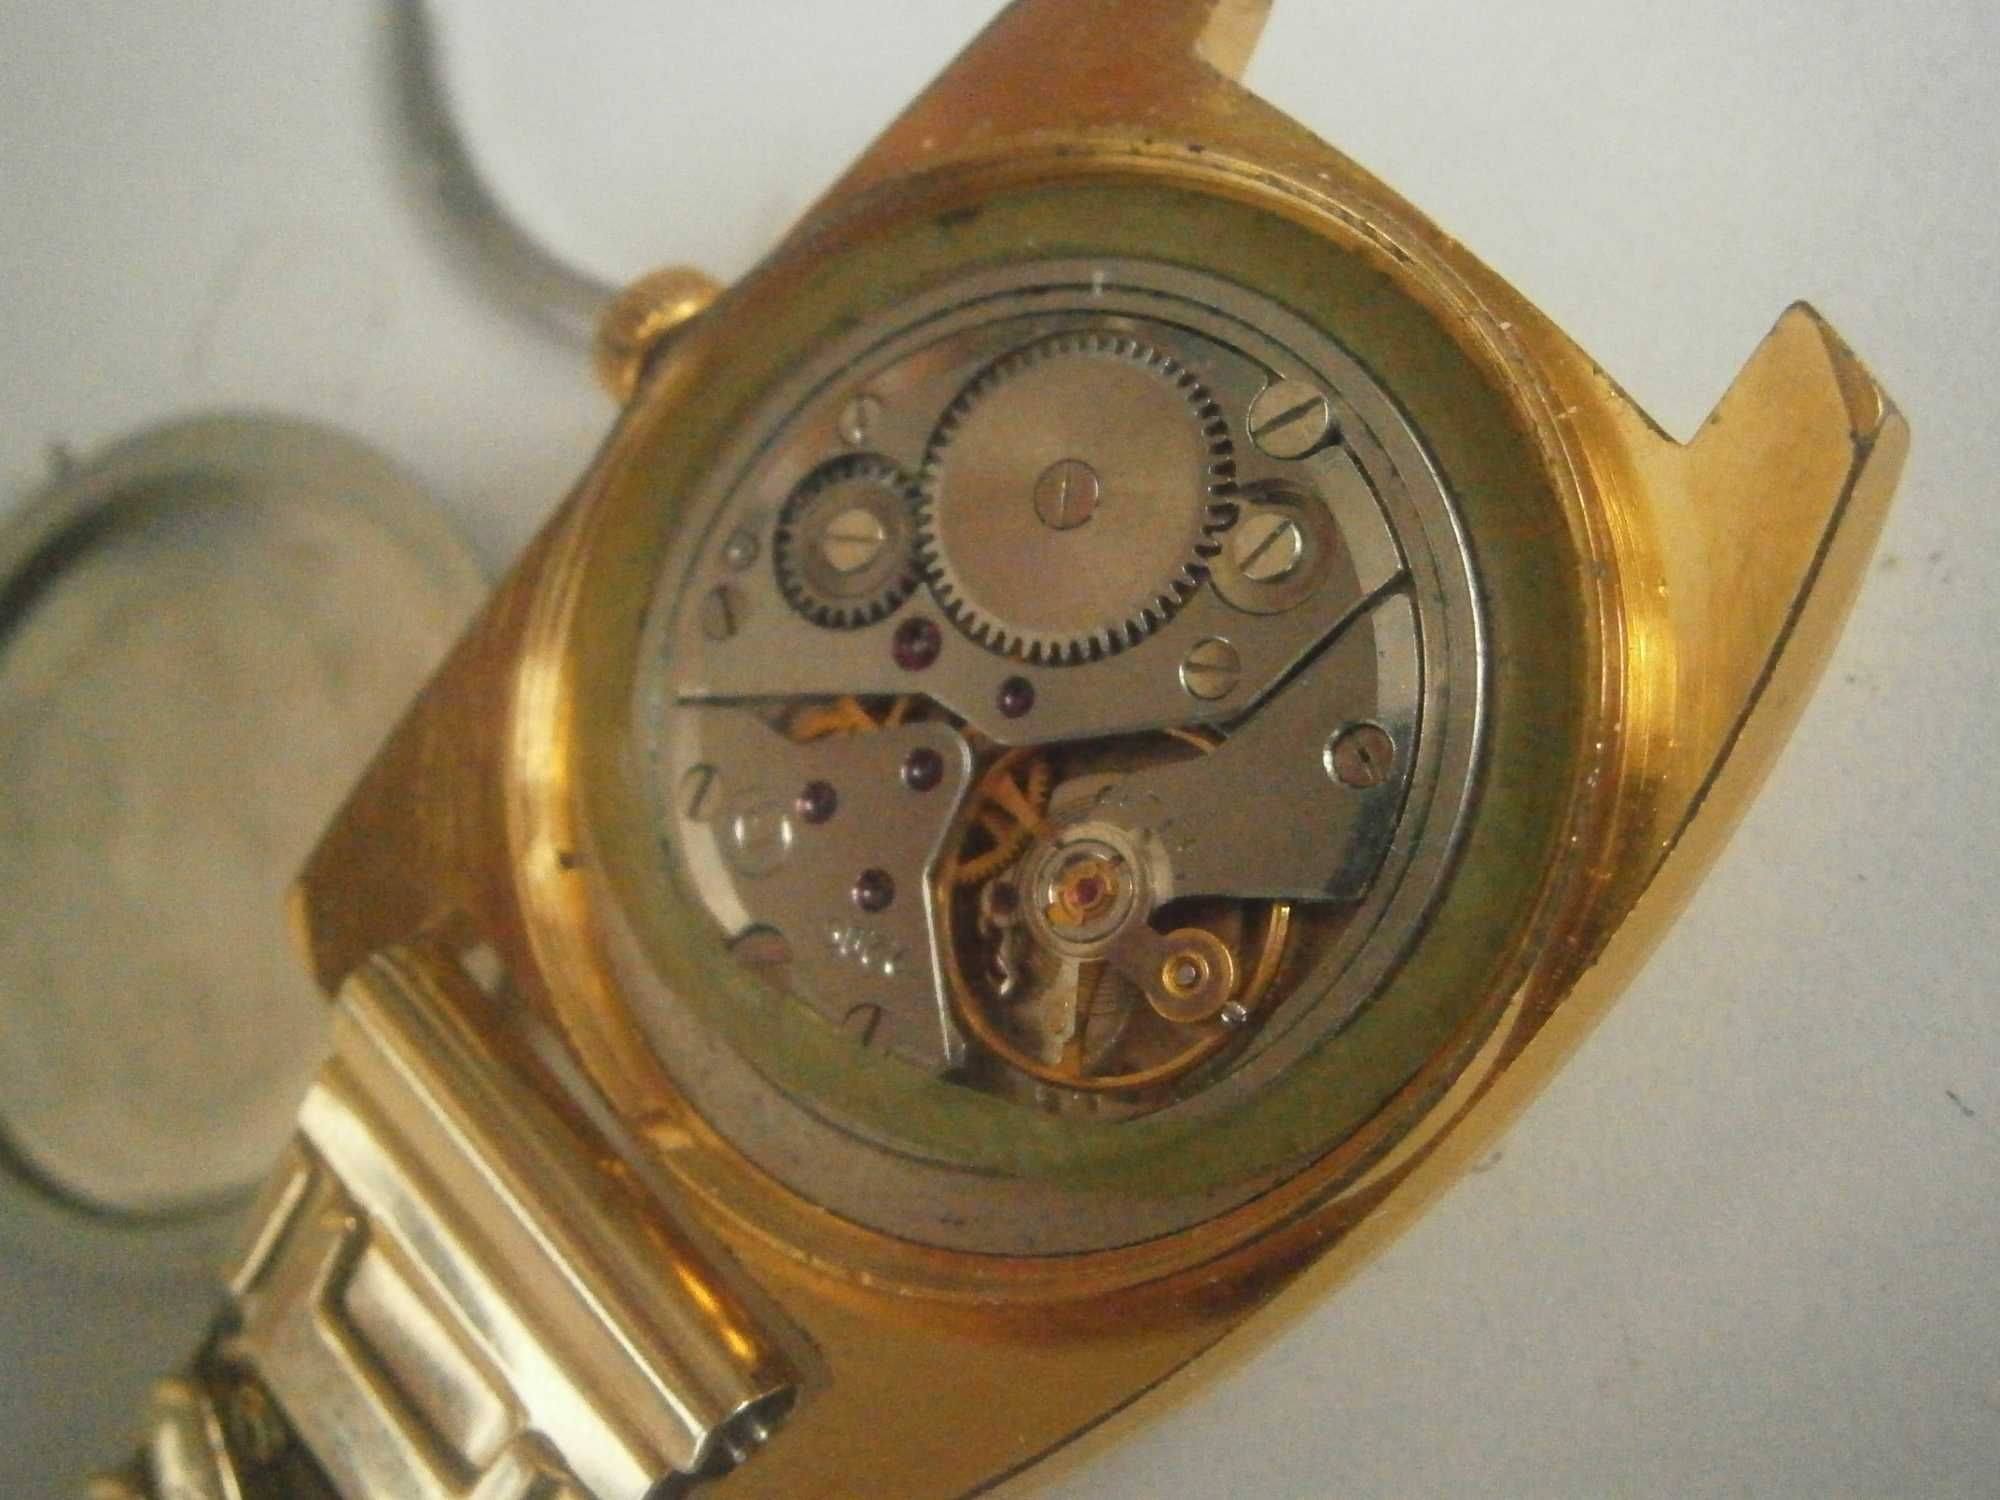 WOSTOK, 18 jewels, made in USSR, cal. 2209, Au 10!